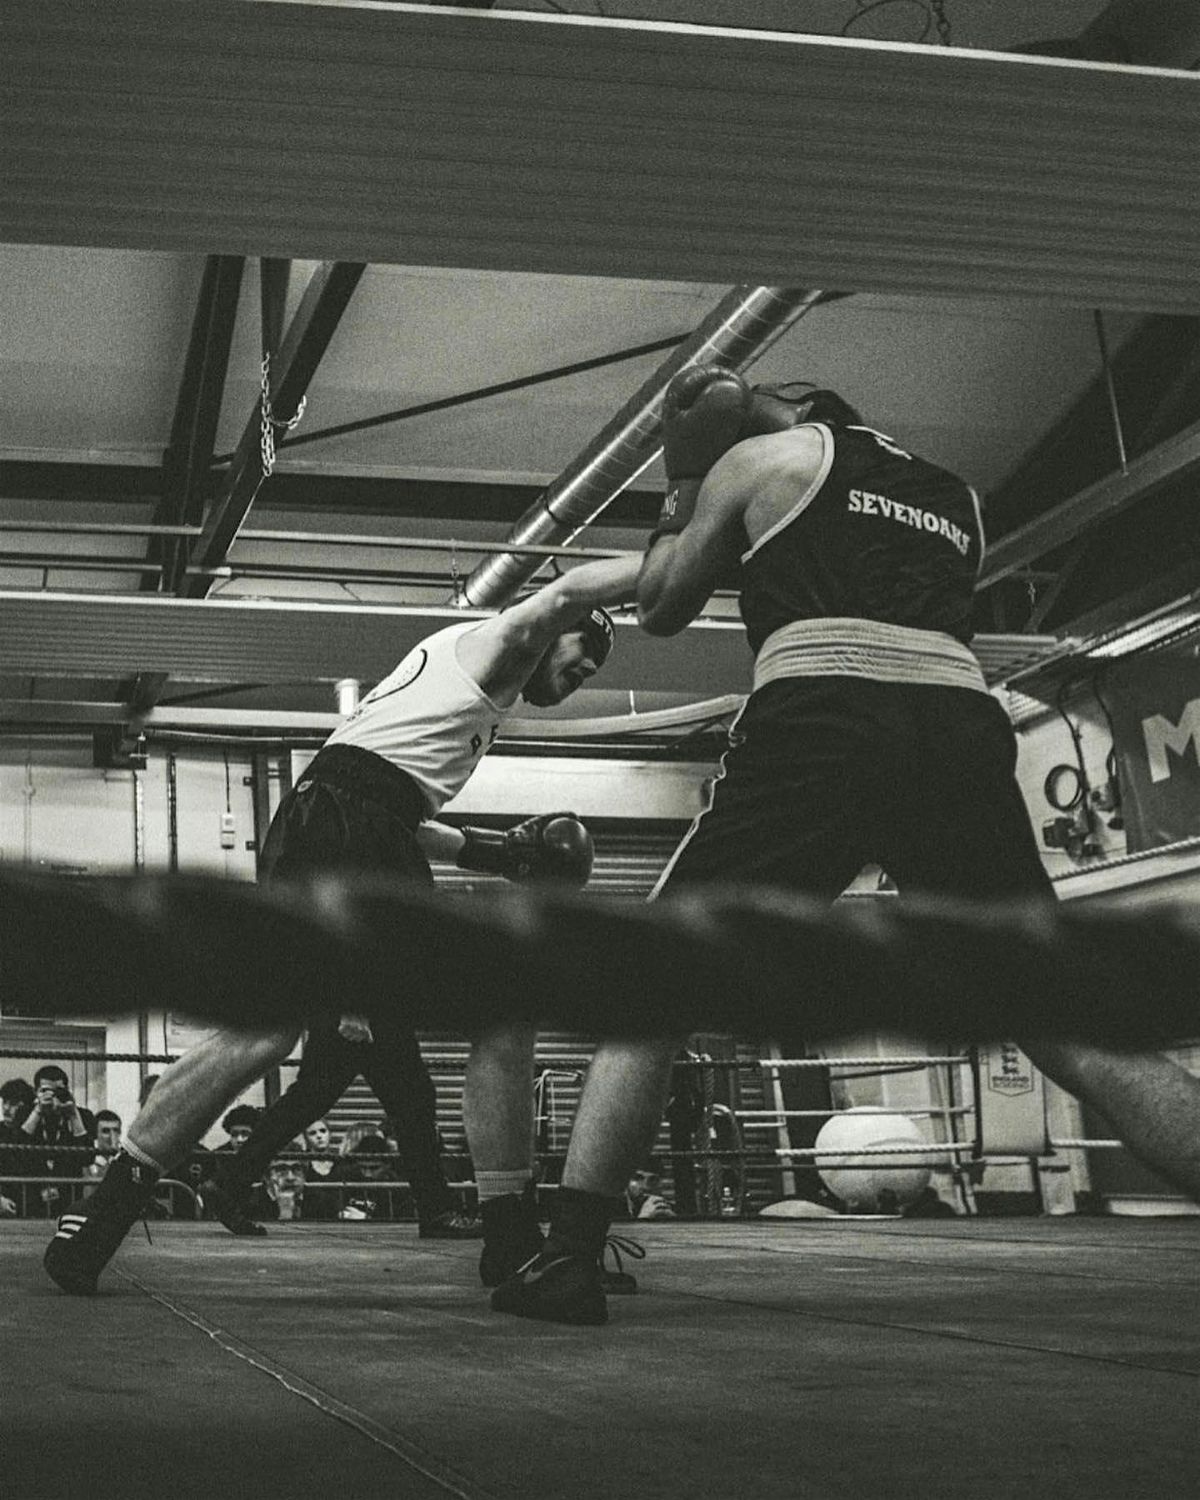 Amateur Boxing Club at Mercato Metropolitano: Women Only Sessions